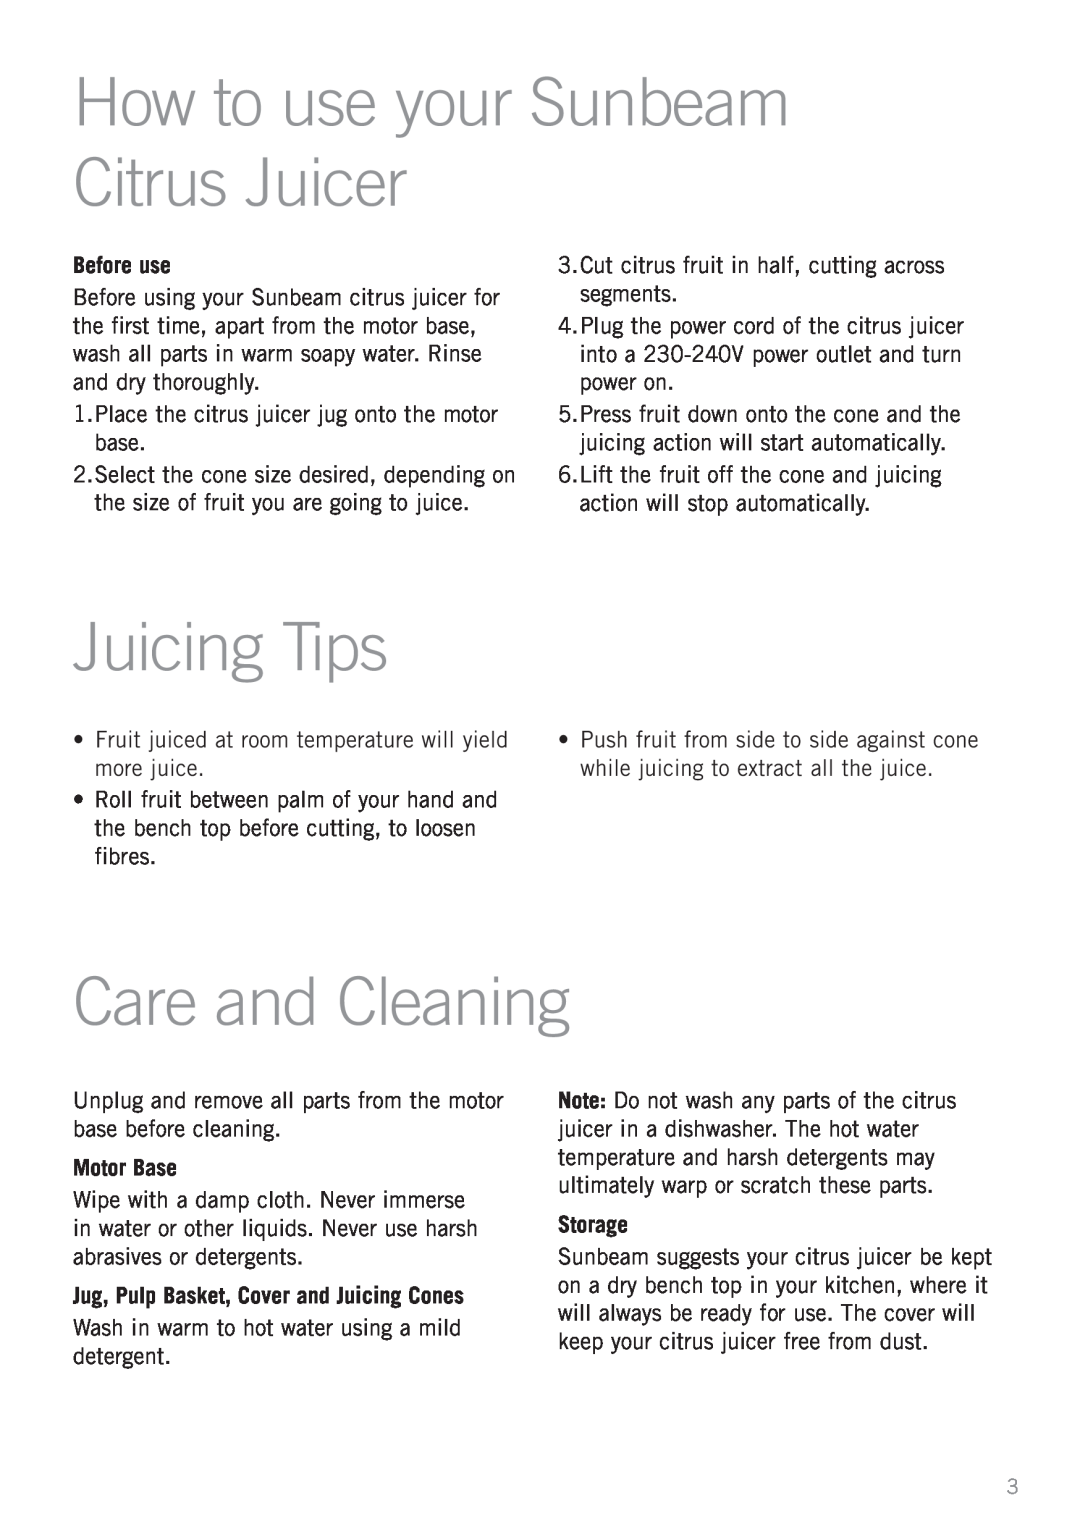 Sunbeam JE2600 How to use your Sunbeam Citrus Juicer, Juicing Tips, Care and Cleaning, Before use, Motor Base, Storage 